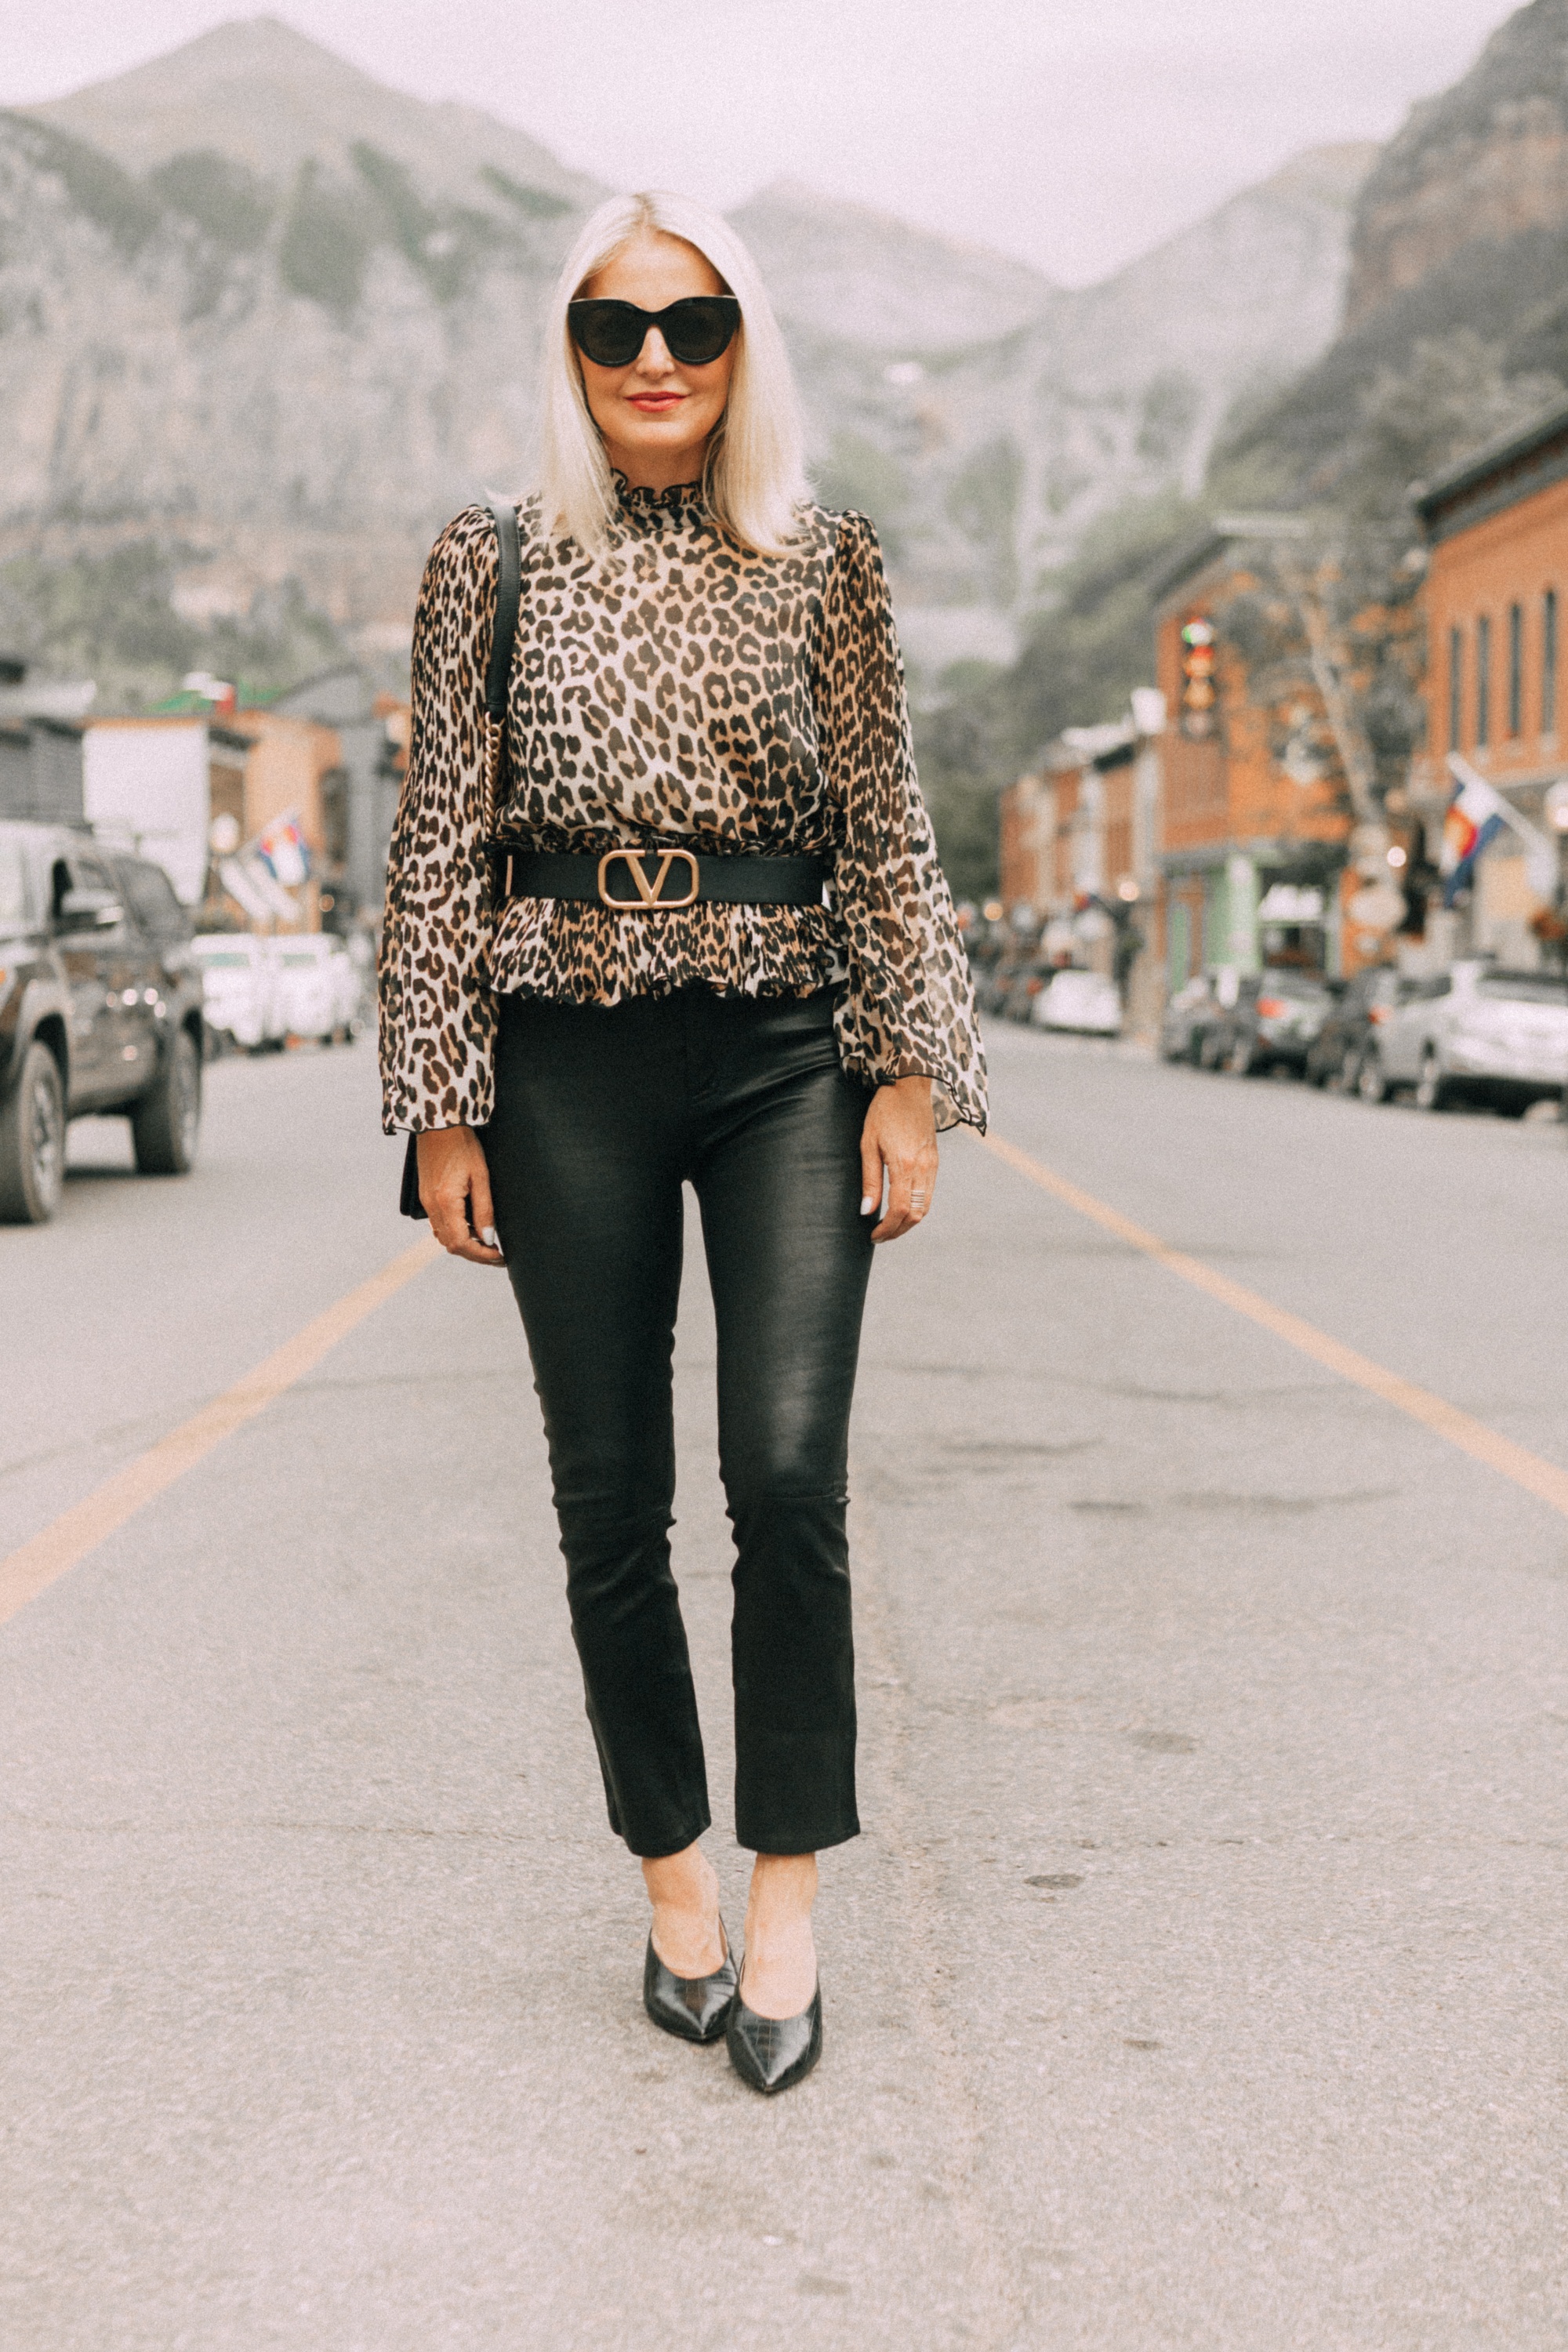 high neck blouse in leopard print by Ganni on fashion blogger erin busbee in Telluride colorado